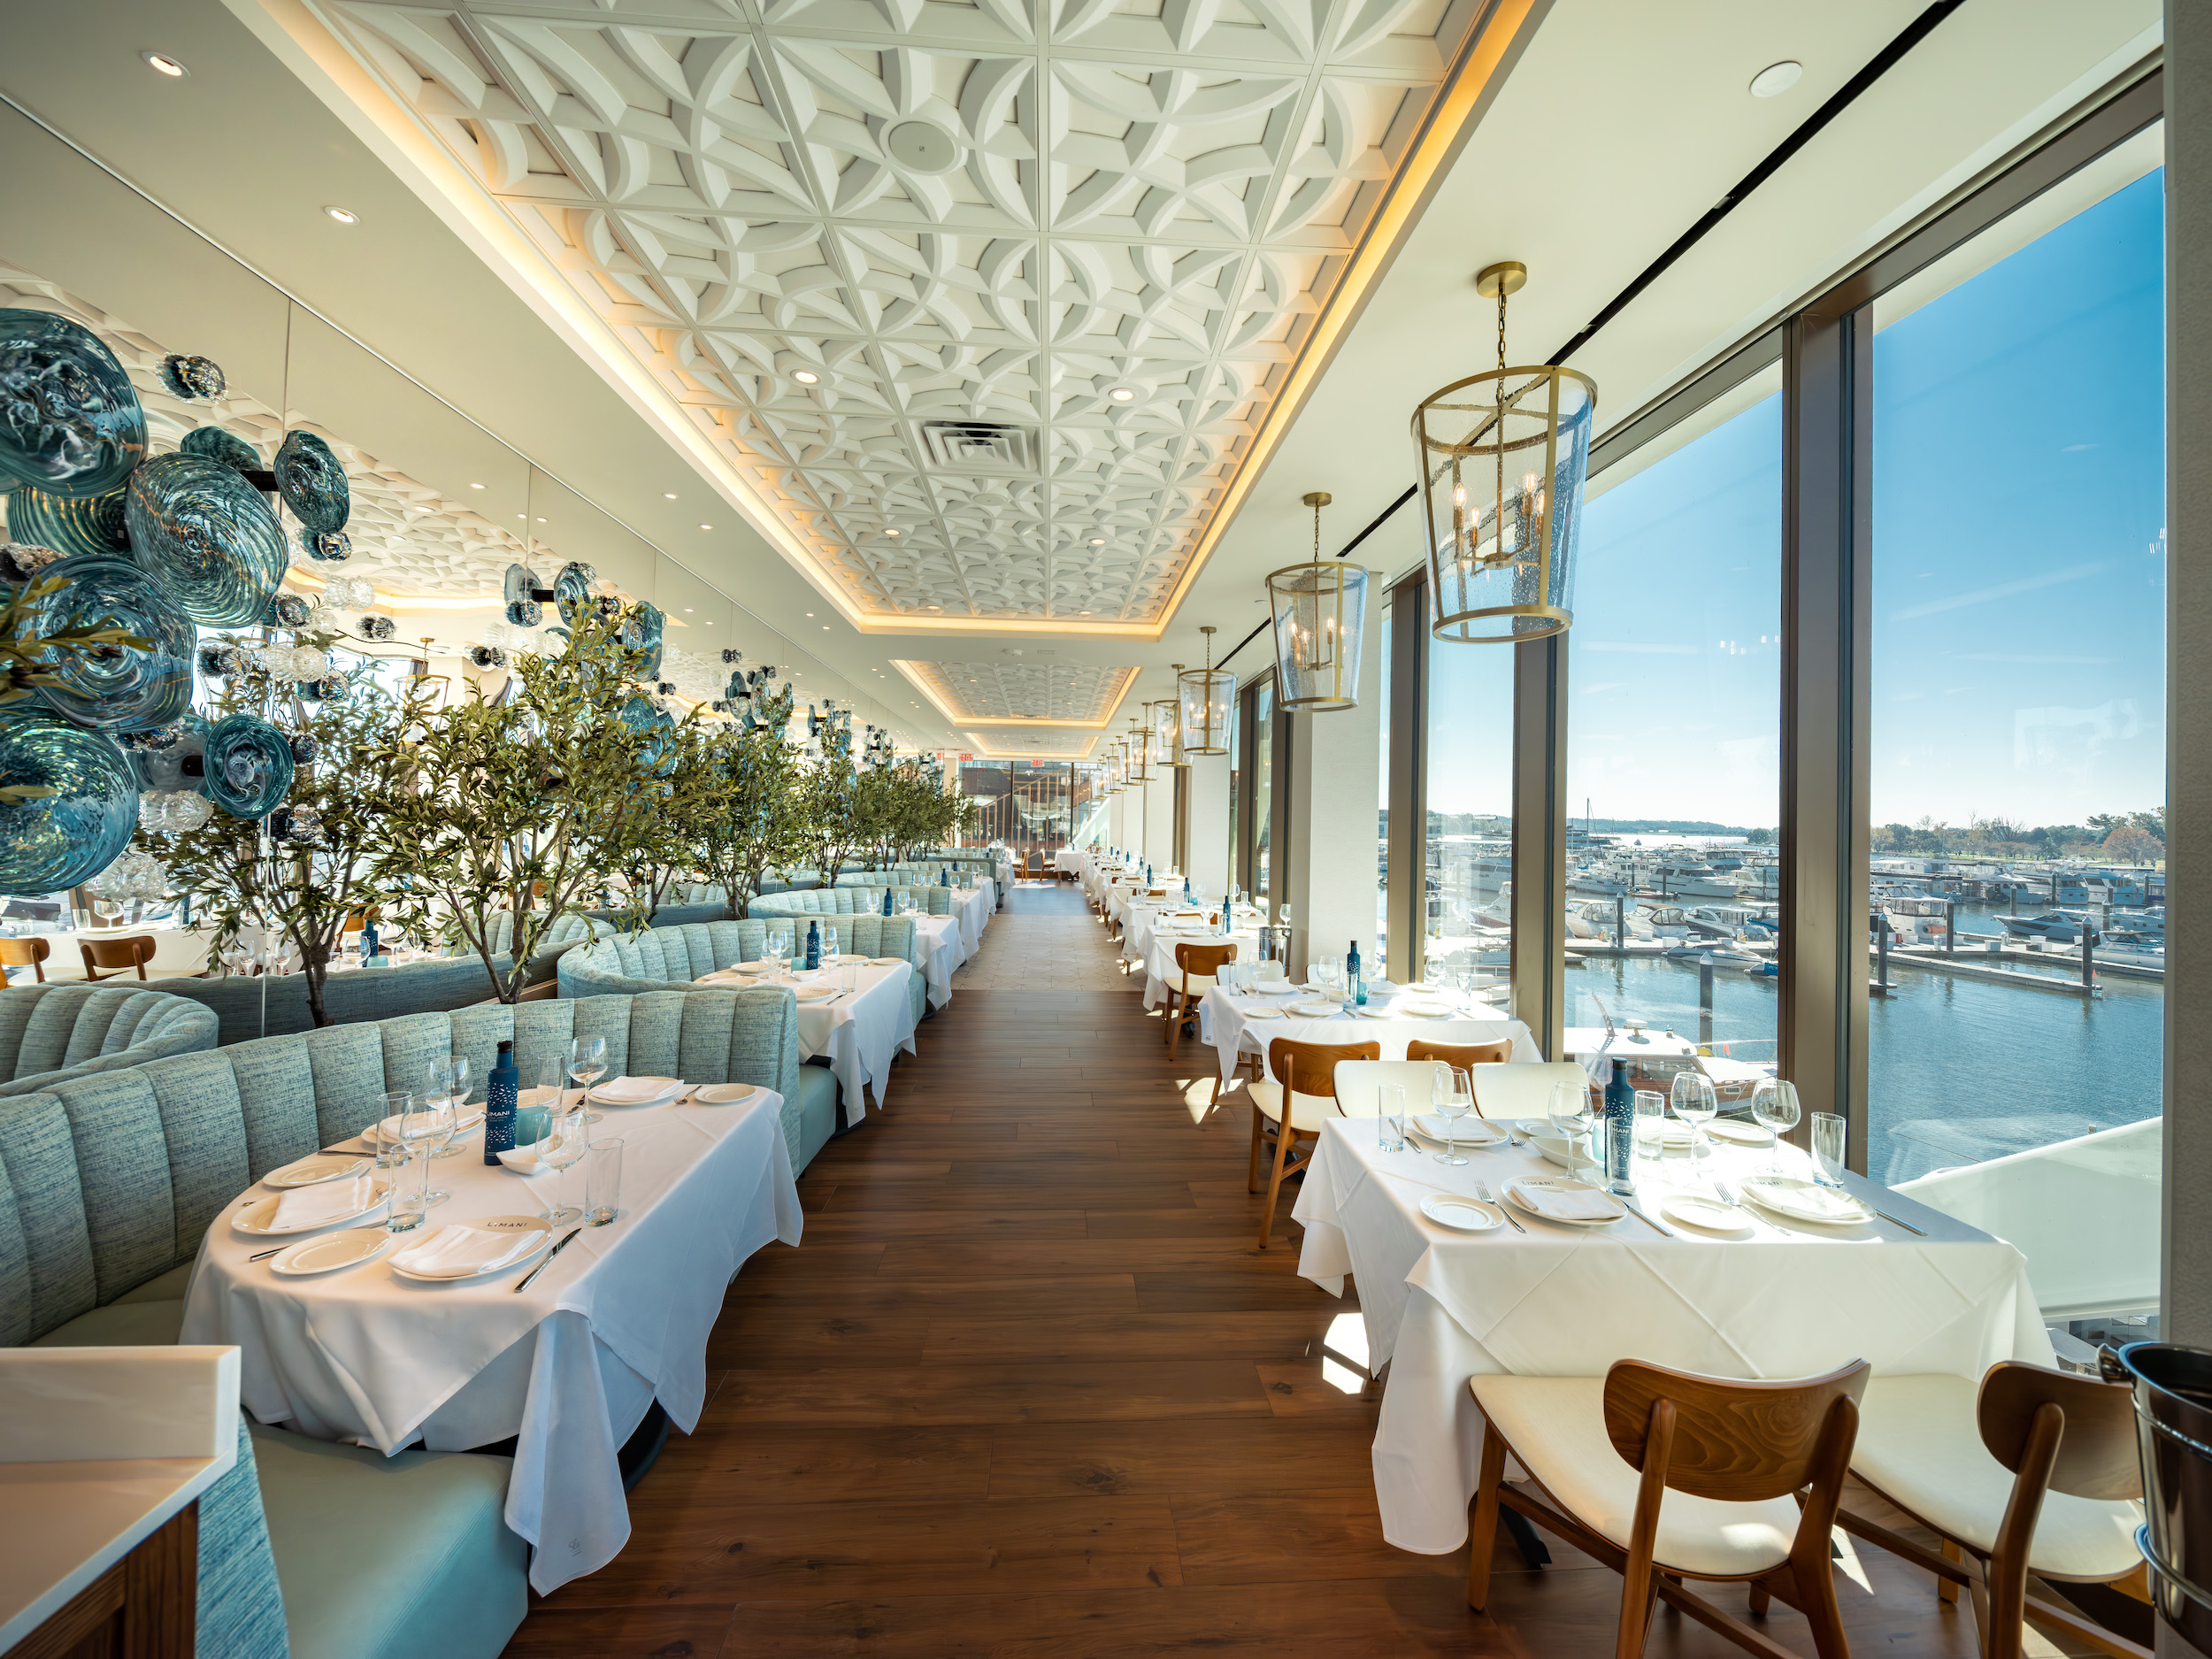 Luxe Greek Restaurant with Mega Yacht Views Opens at the Wharf